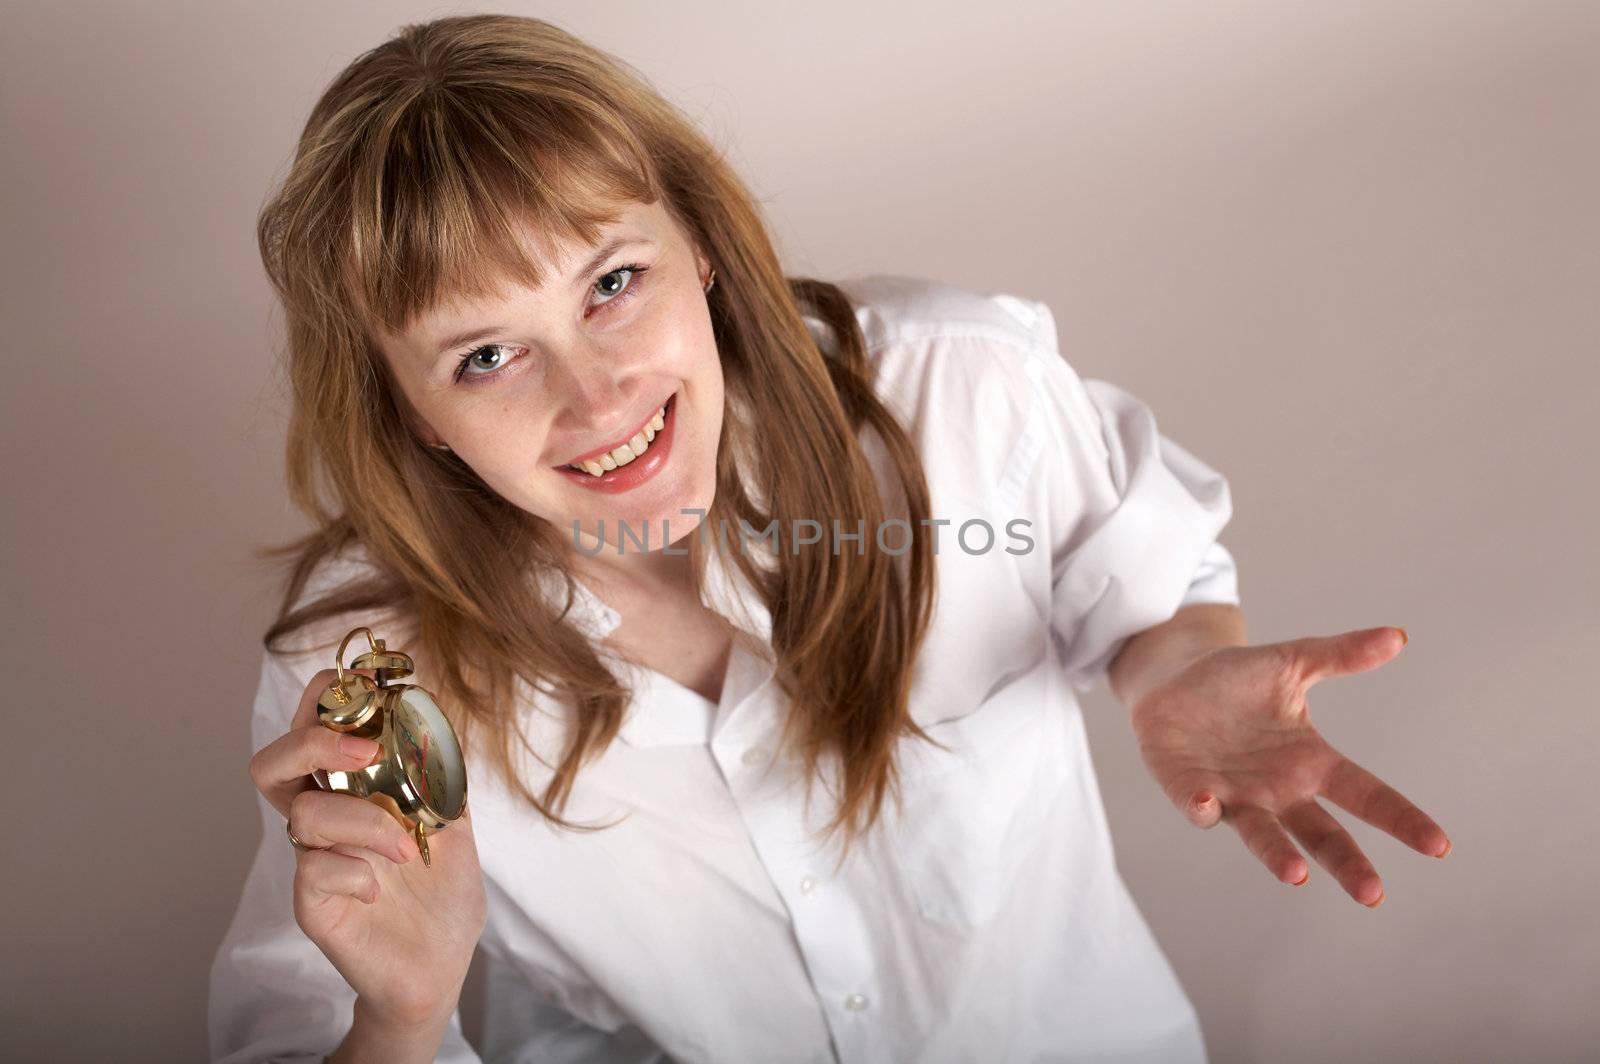 A nice woman in a white shirt holding an alarm-clock